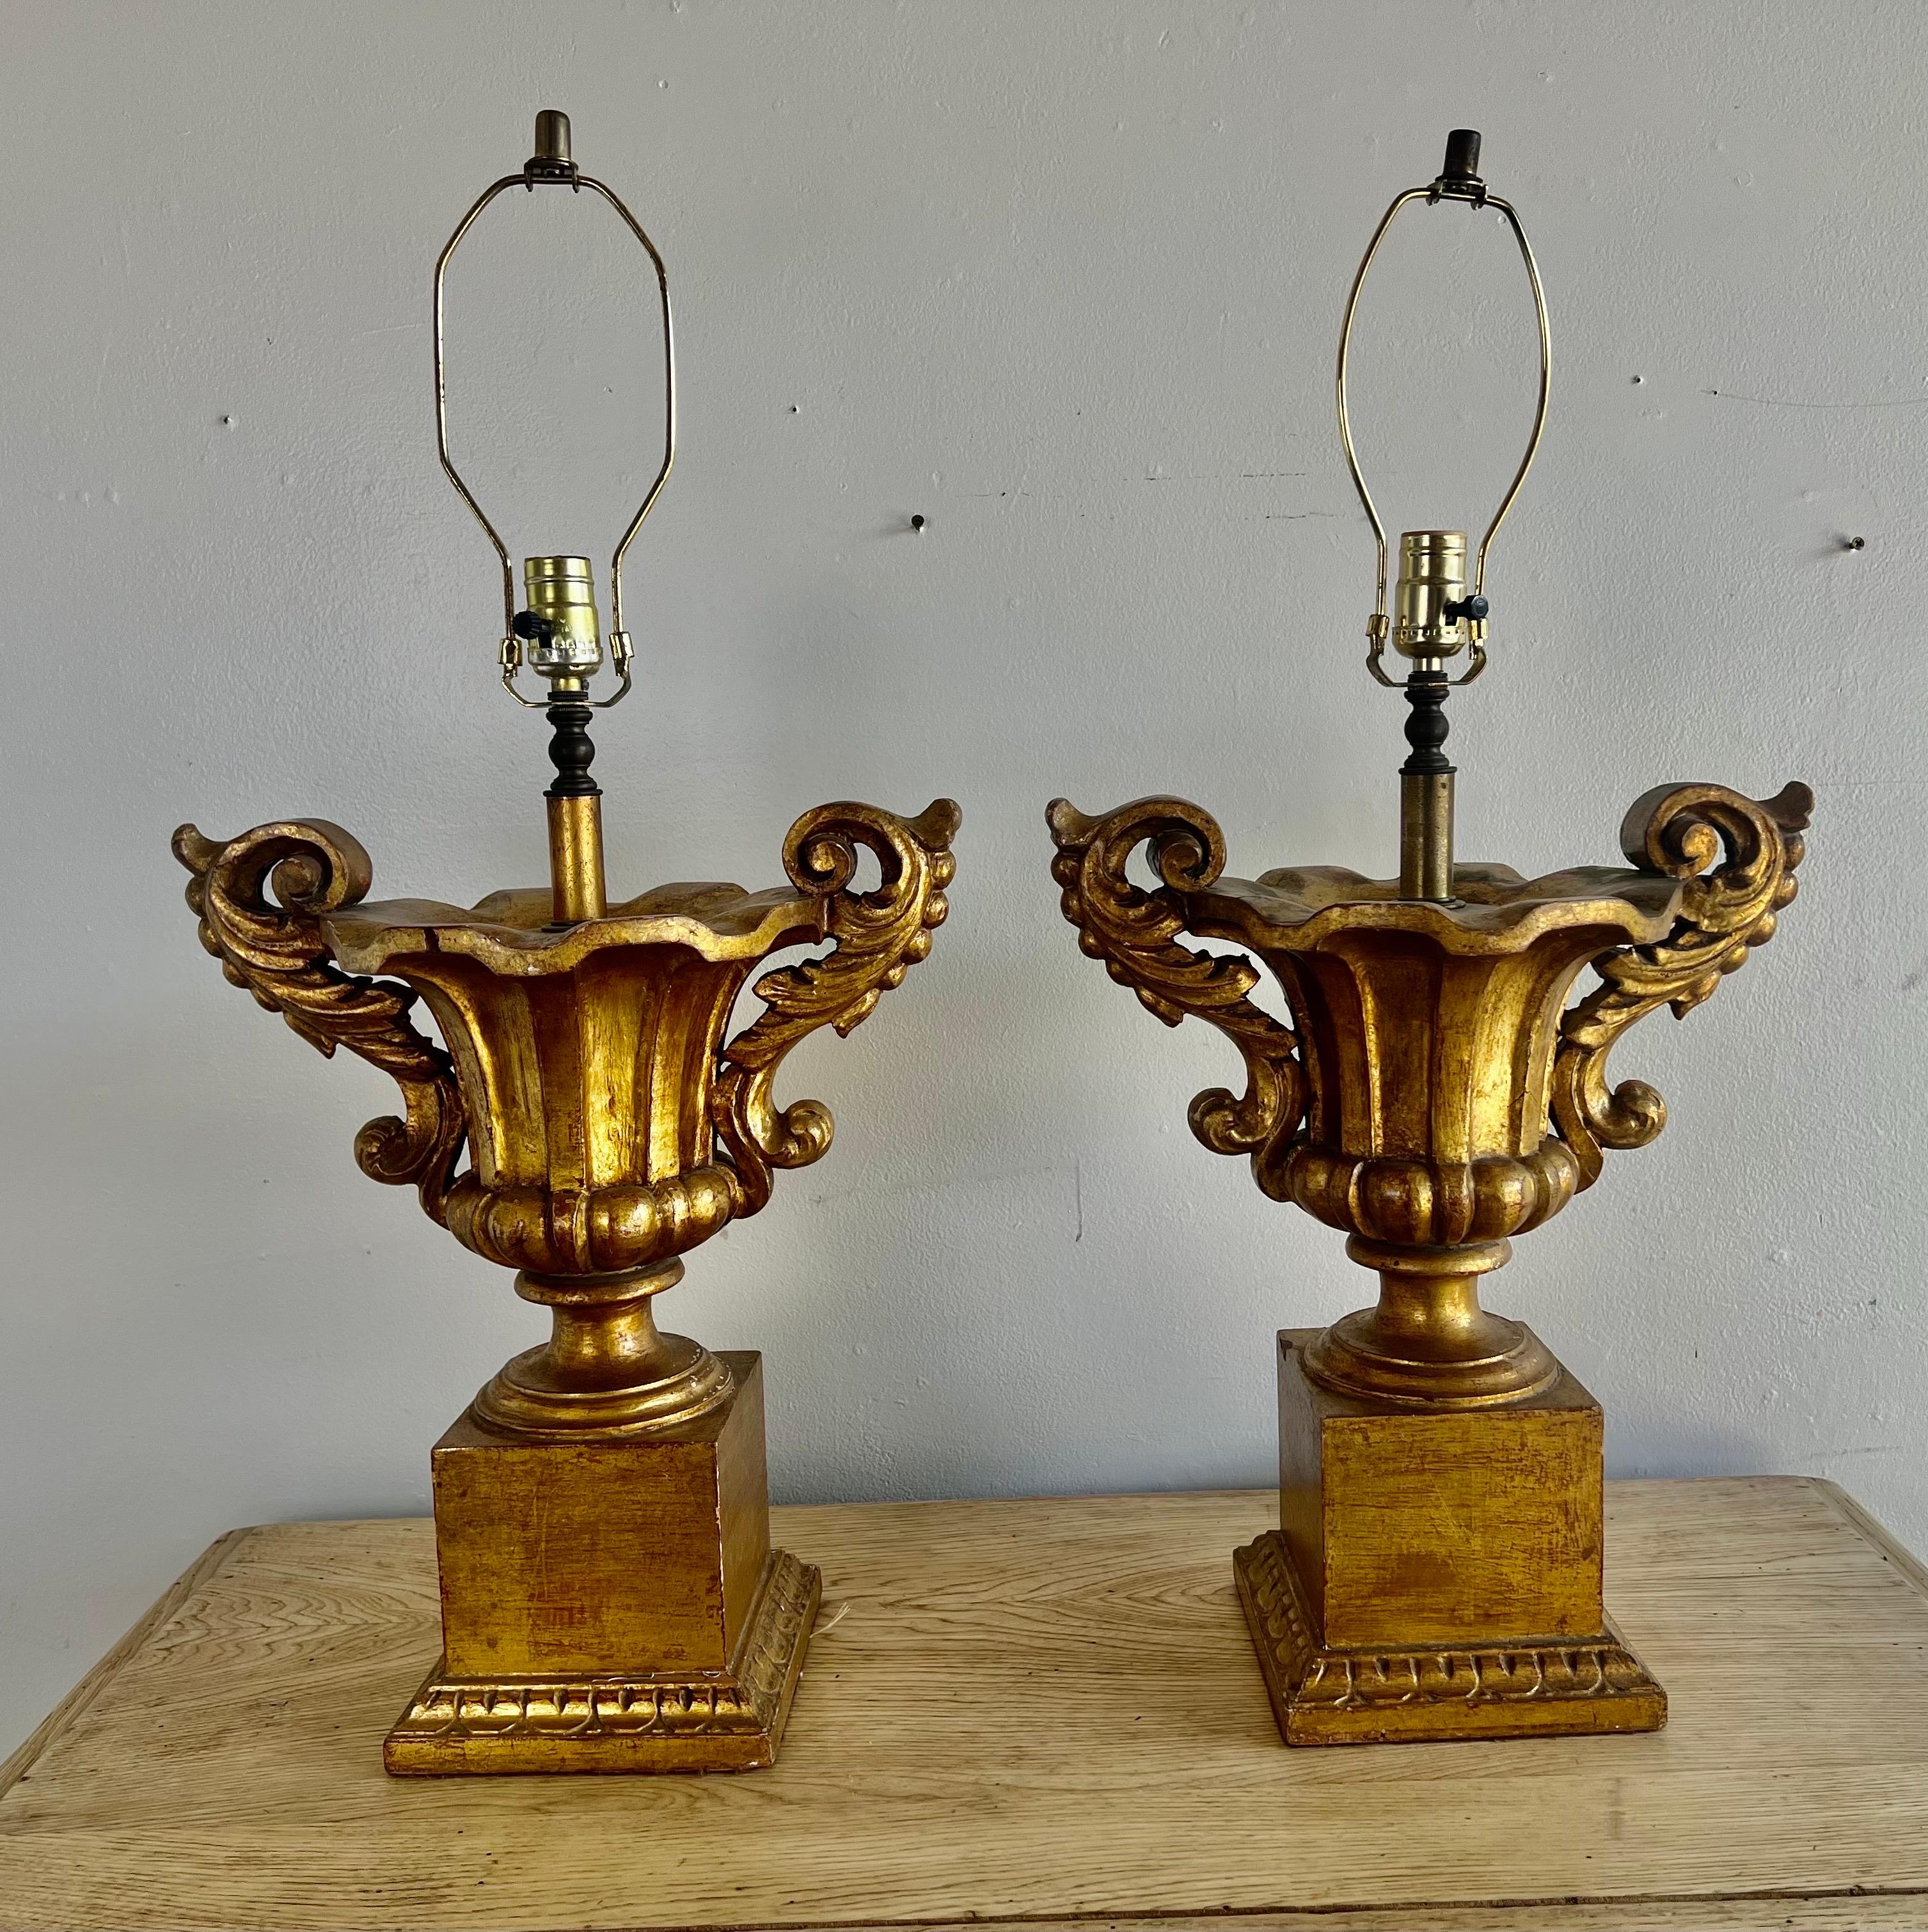 Pair of Italian Neoclassical style giltwood urn lamps with carved acanthus leaves.  The urns sit on plinth bases.  The lamps are both in working condition.